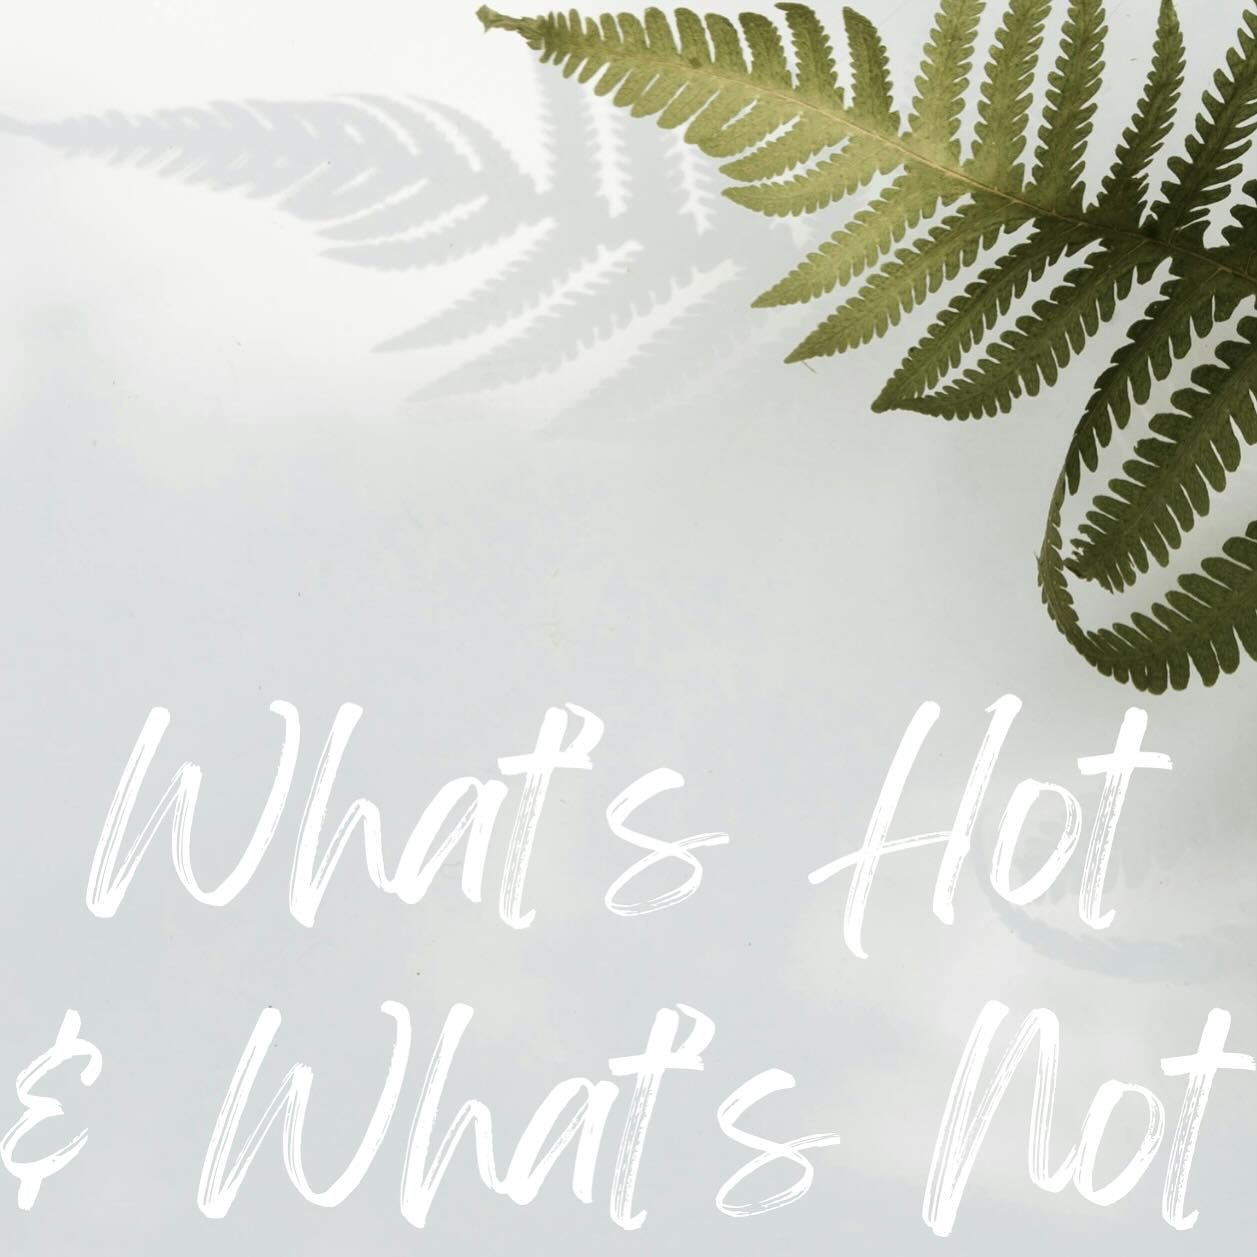 We&rsquo;ve launched a new feature online - an extract from the magazine - called What&rsquo;s Hot &amp; What&rsquo;s Not 💥

Find out what&rsquo;s selling and what&rsquo;s not shifting @apothecary27 on our homepage now 🔥

#whatshot #retail #wellnes